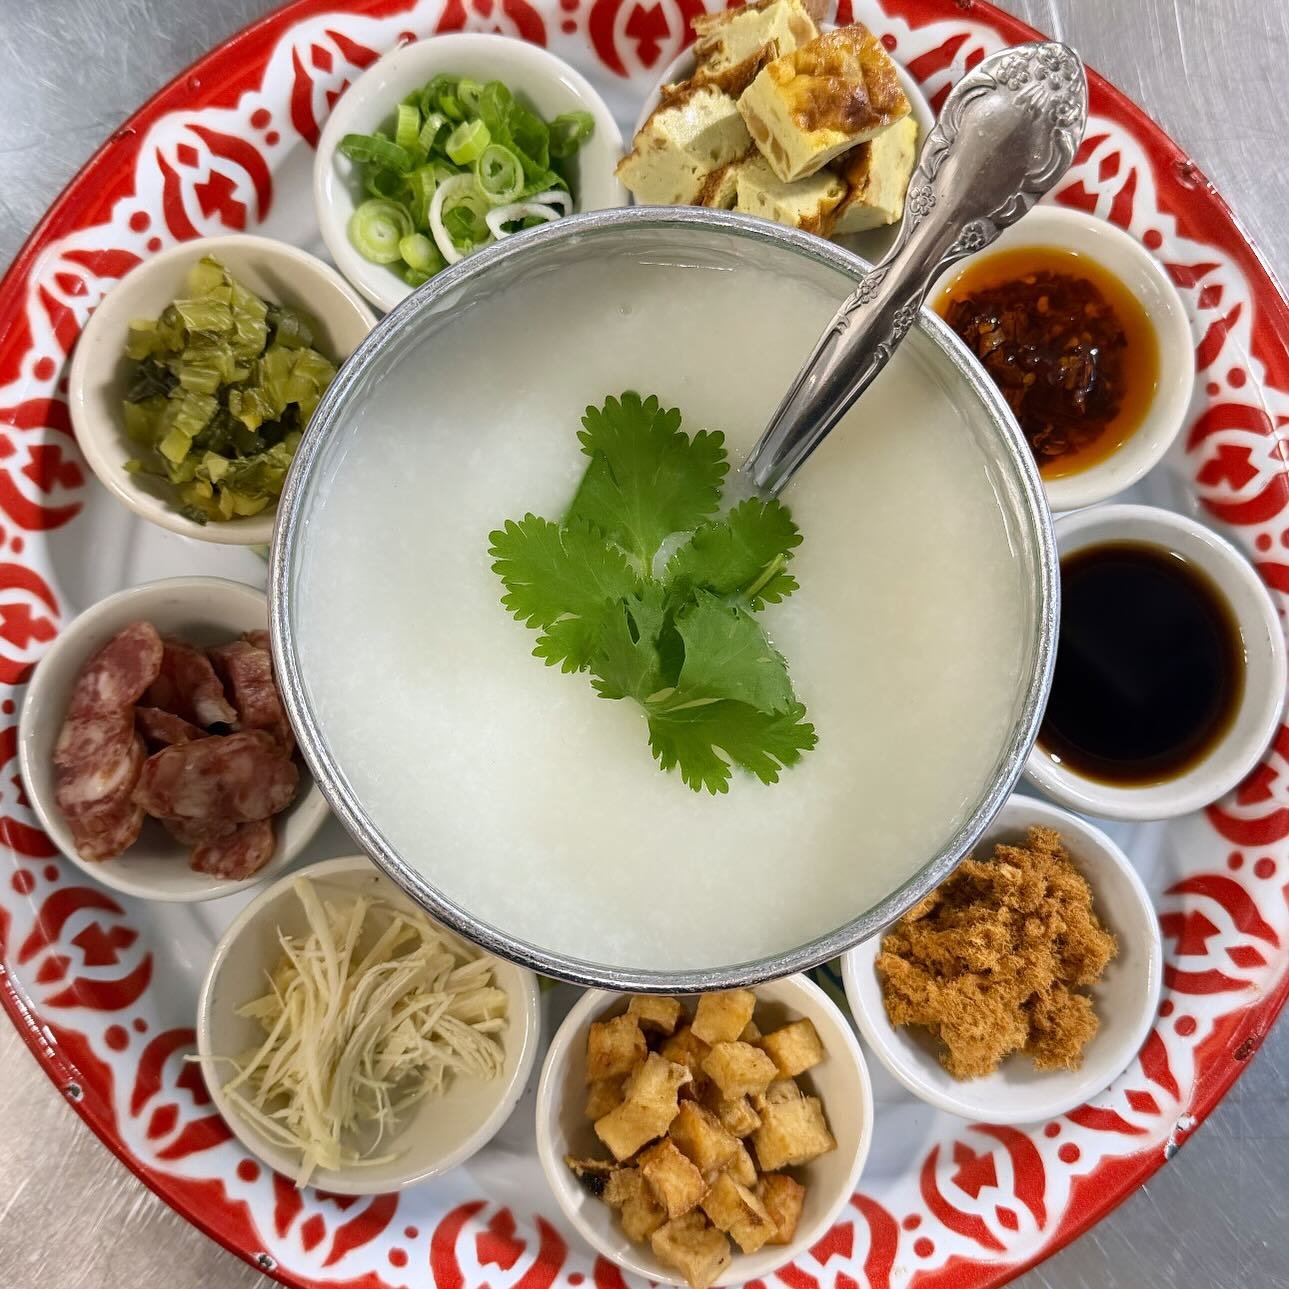 Happy Mother&rsquo;s Day
We are ready to celebrate with you. 🙏🏼
📸 Congee Platter